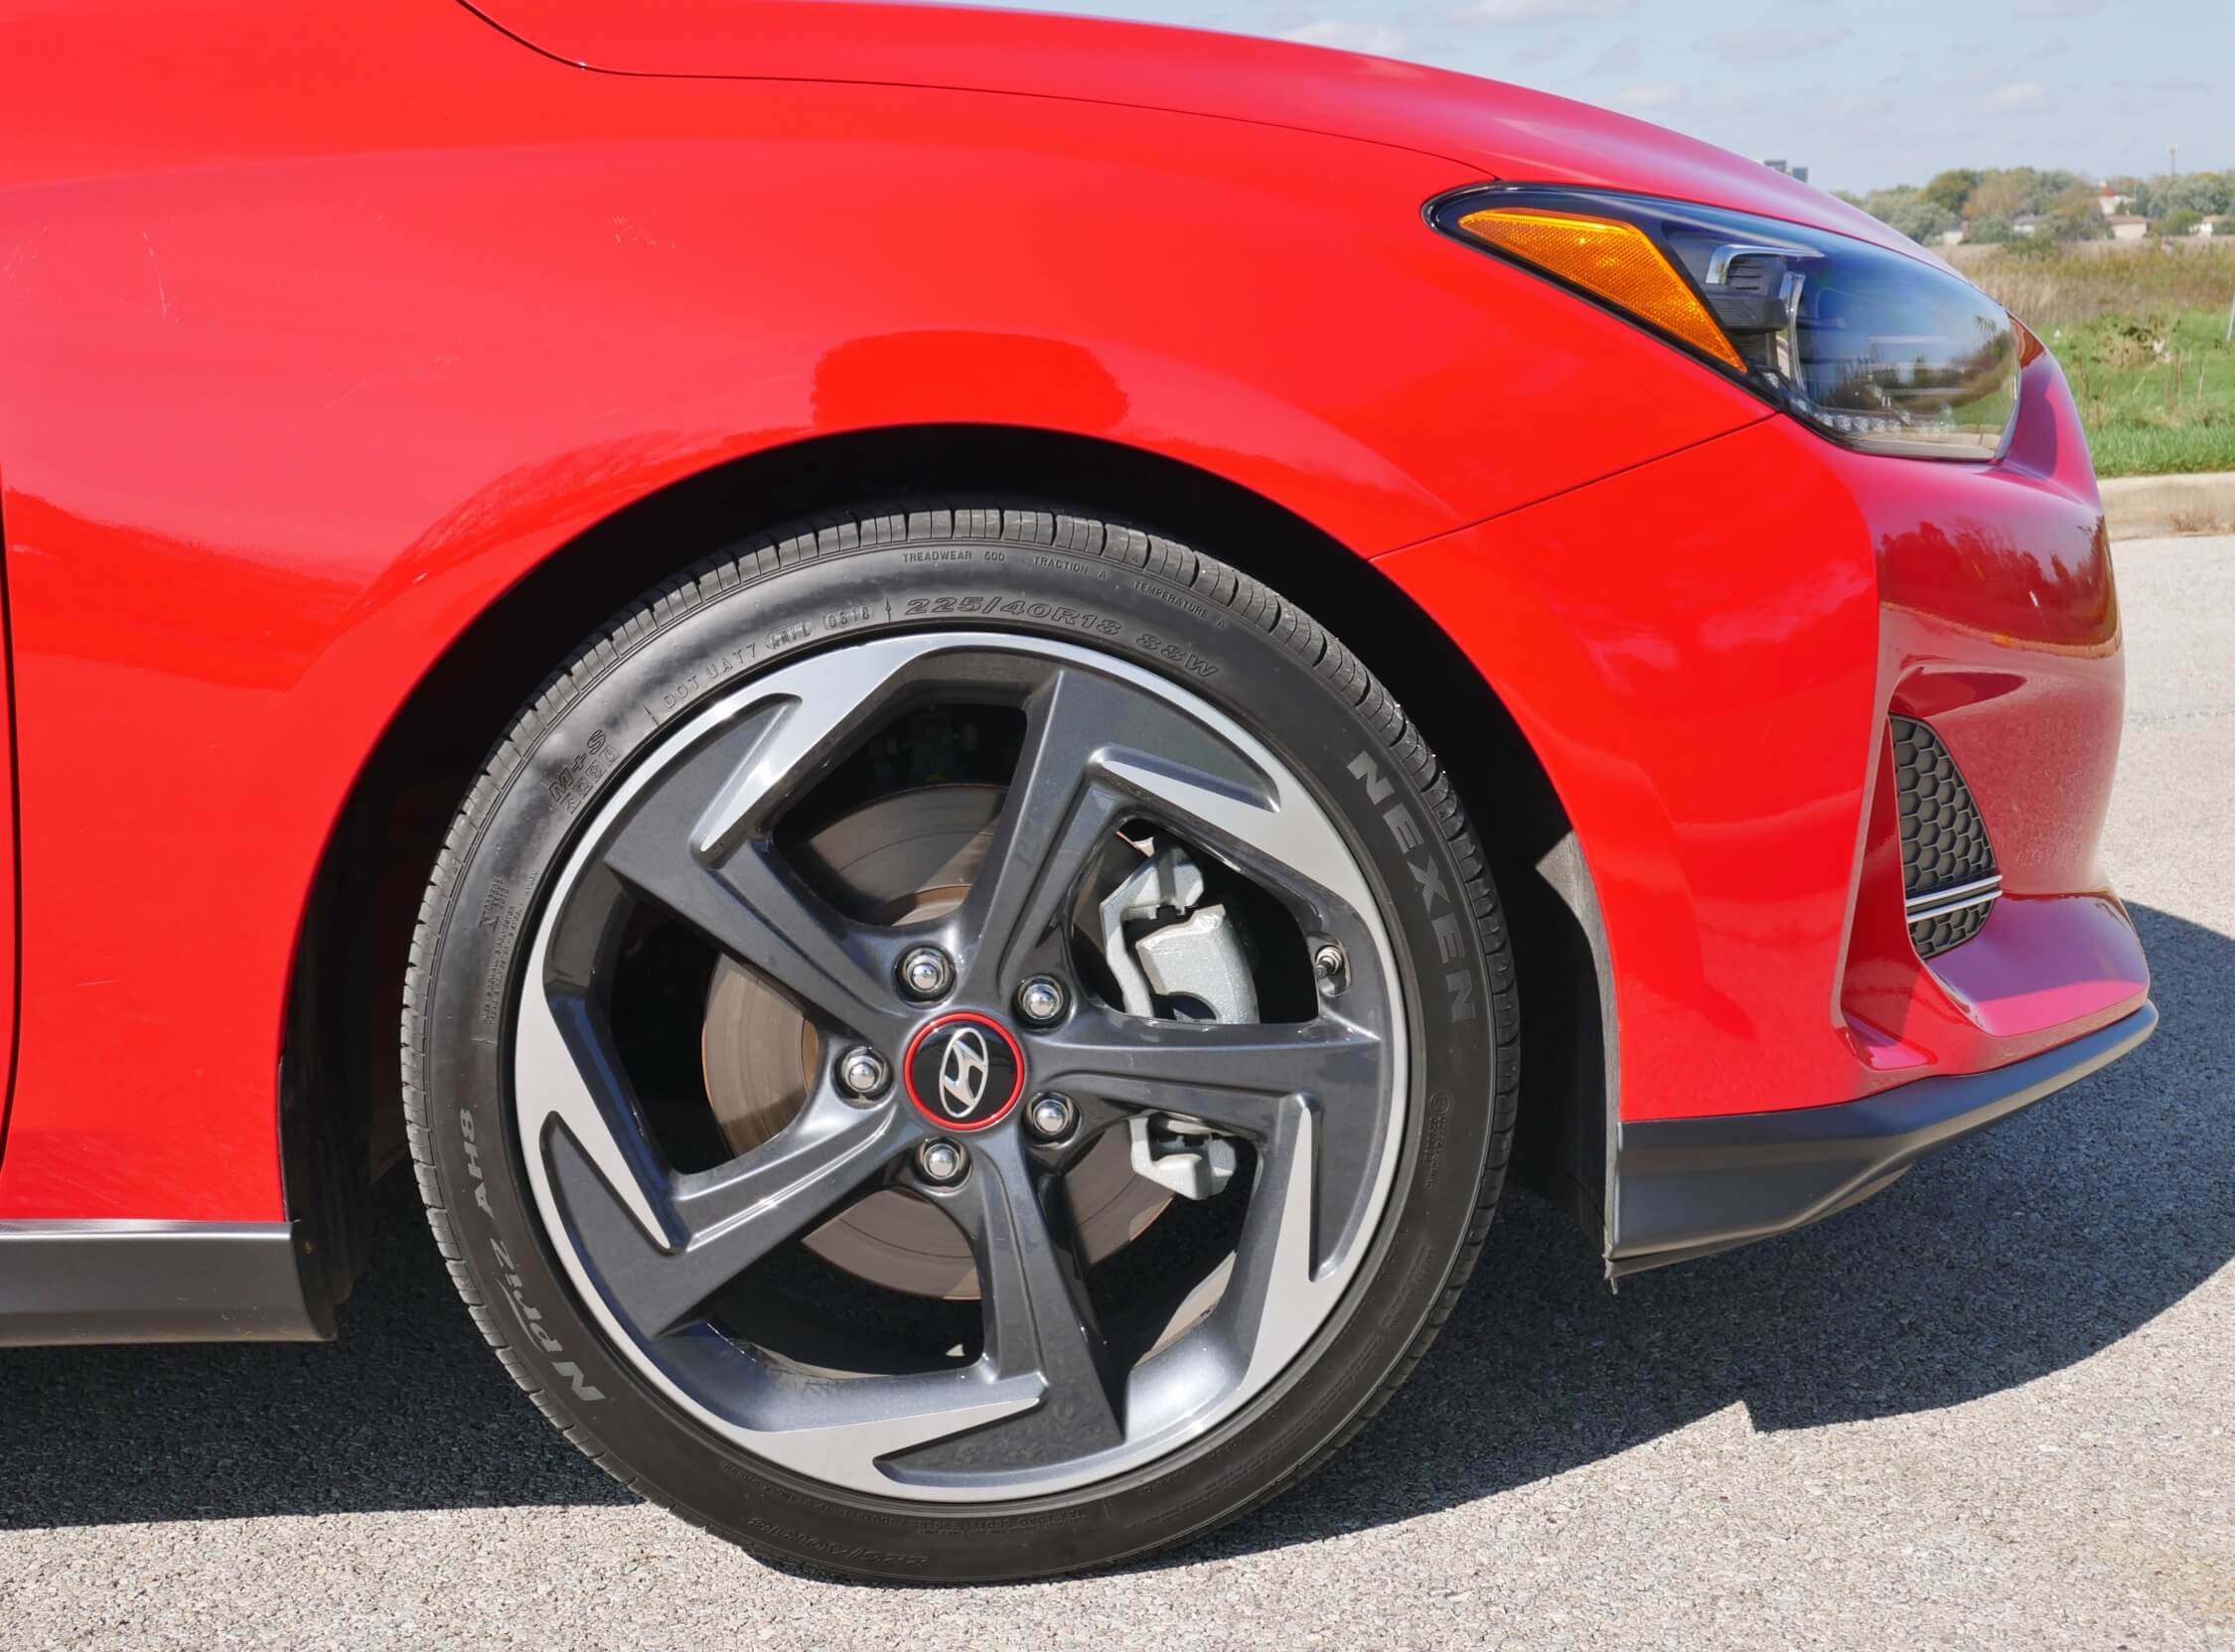 2018 Hyundai Veloster Turbo Ultimate: 19" alloys seek more grip, independent suspension tuned for more directional precision